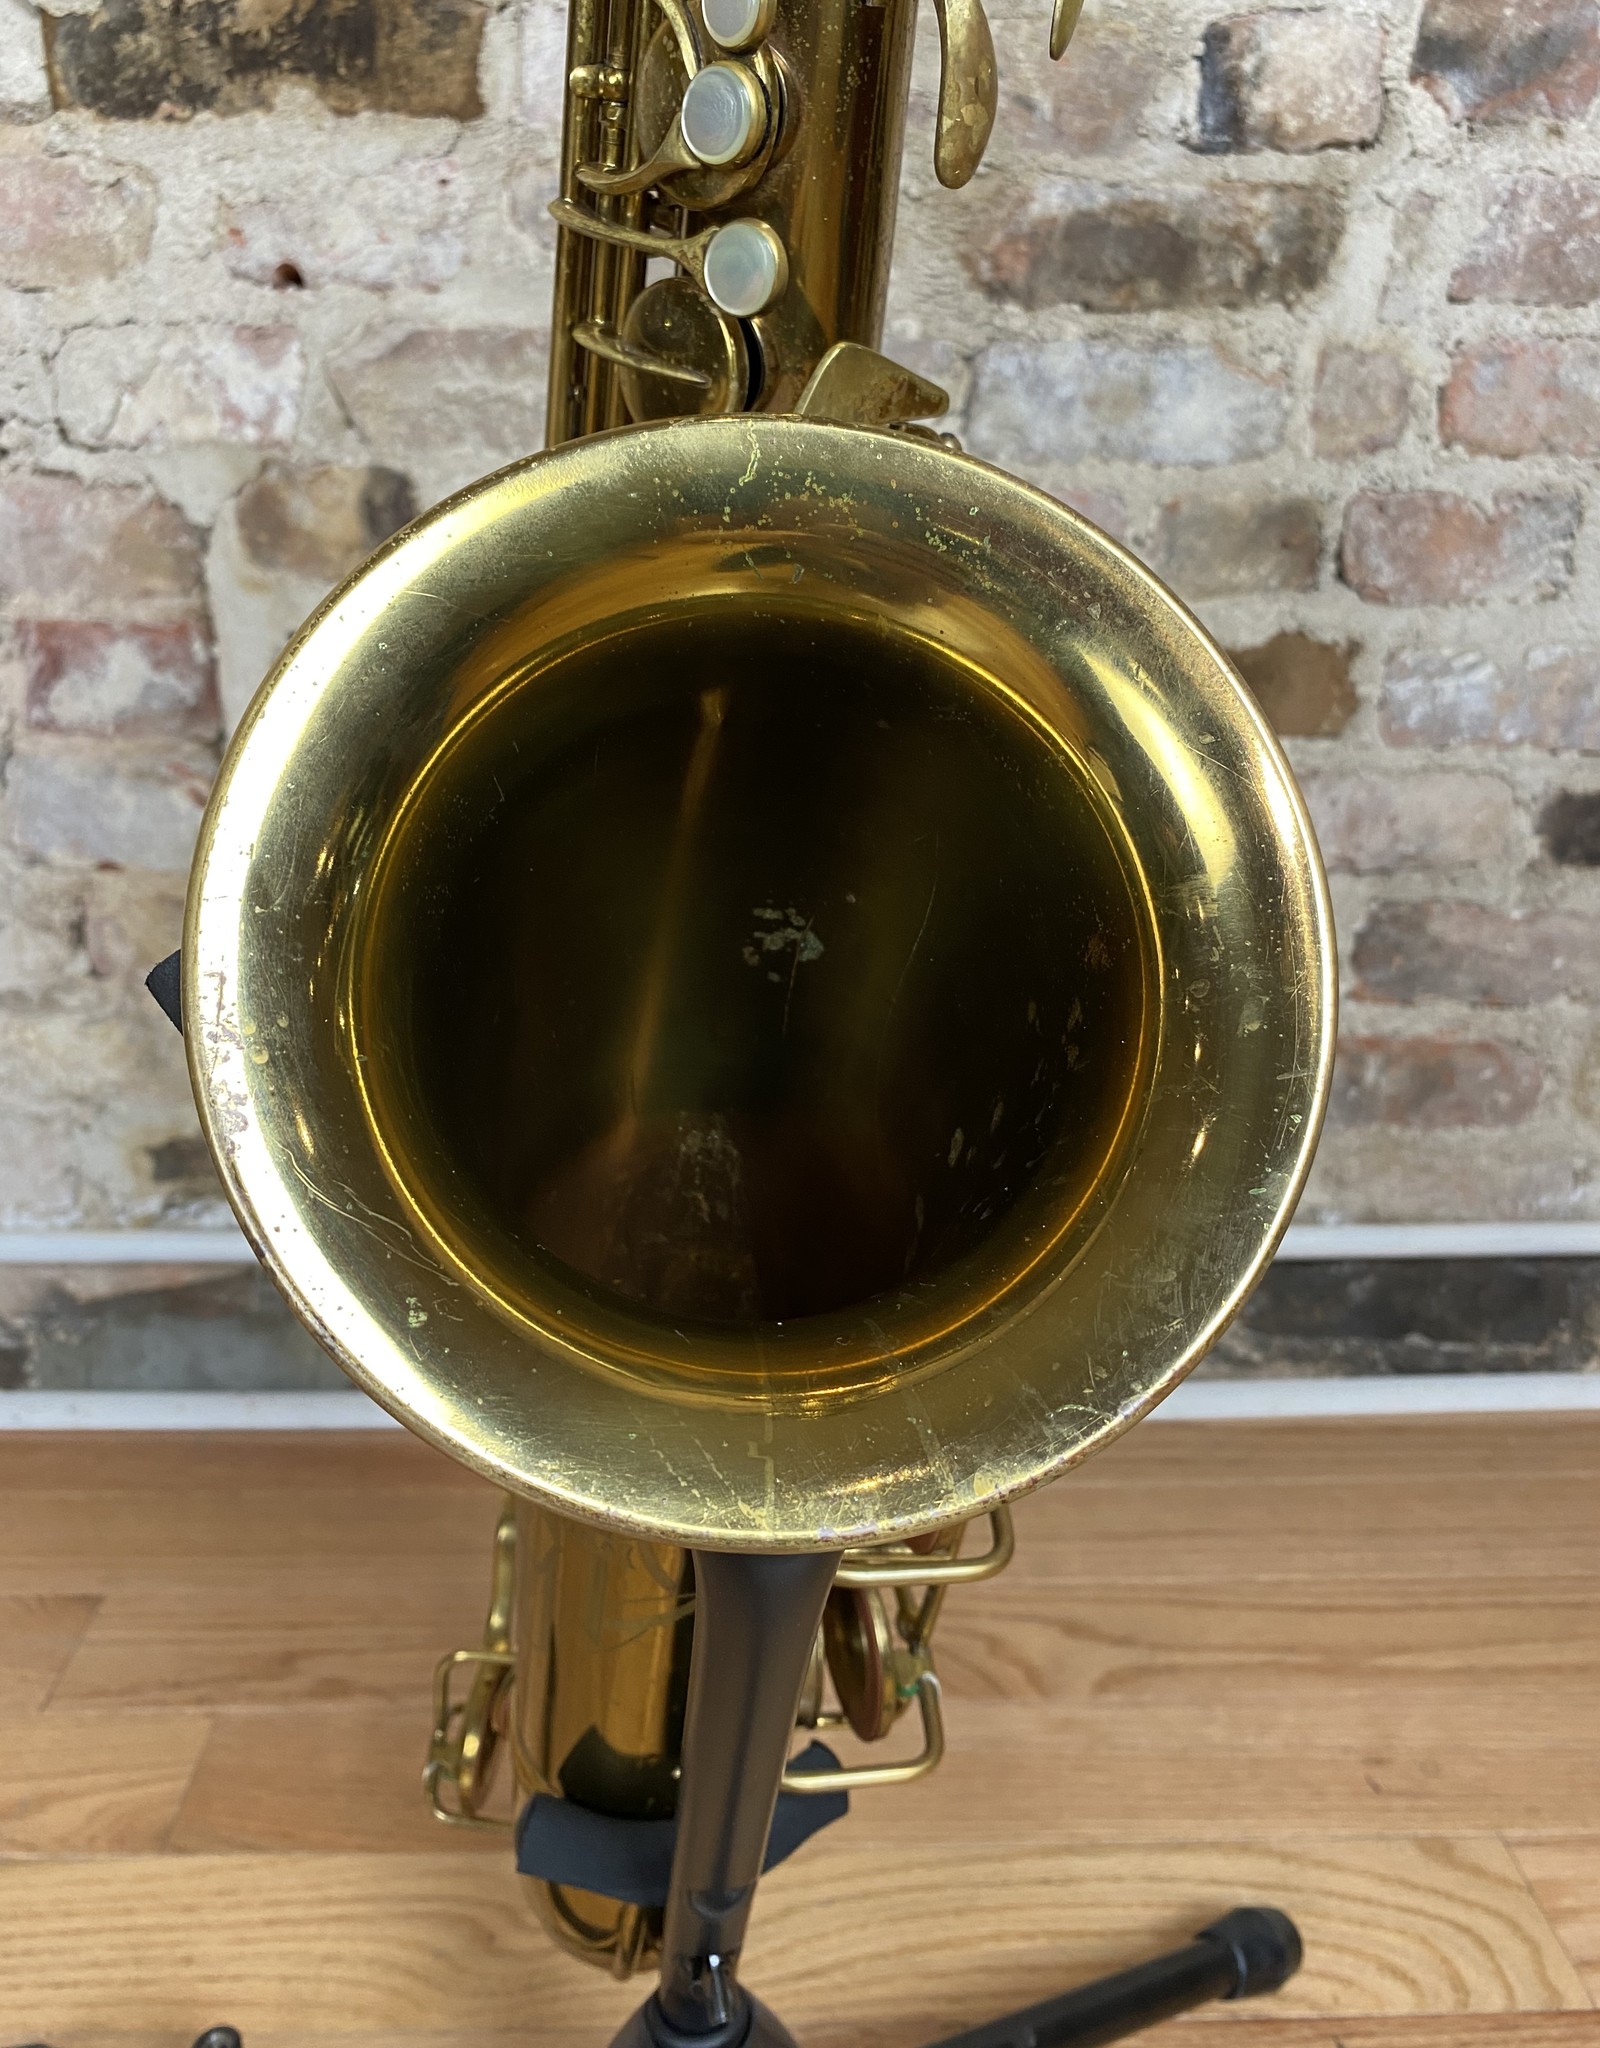 conn 10M 1939 Conn 10M Naked Lady Tenor Saxophone with gorgeous original lacquer and fresh overhaul